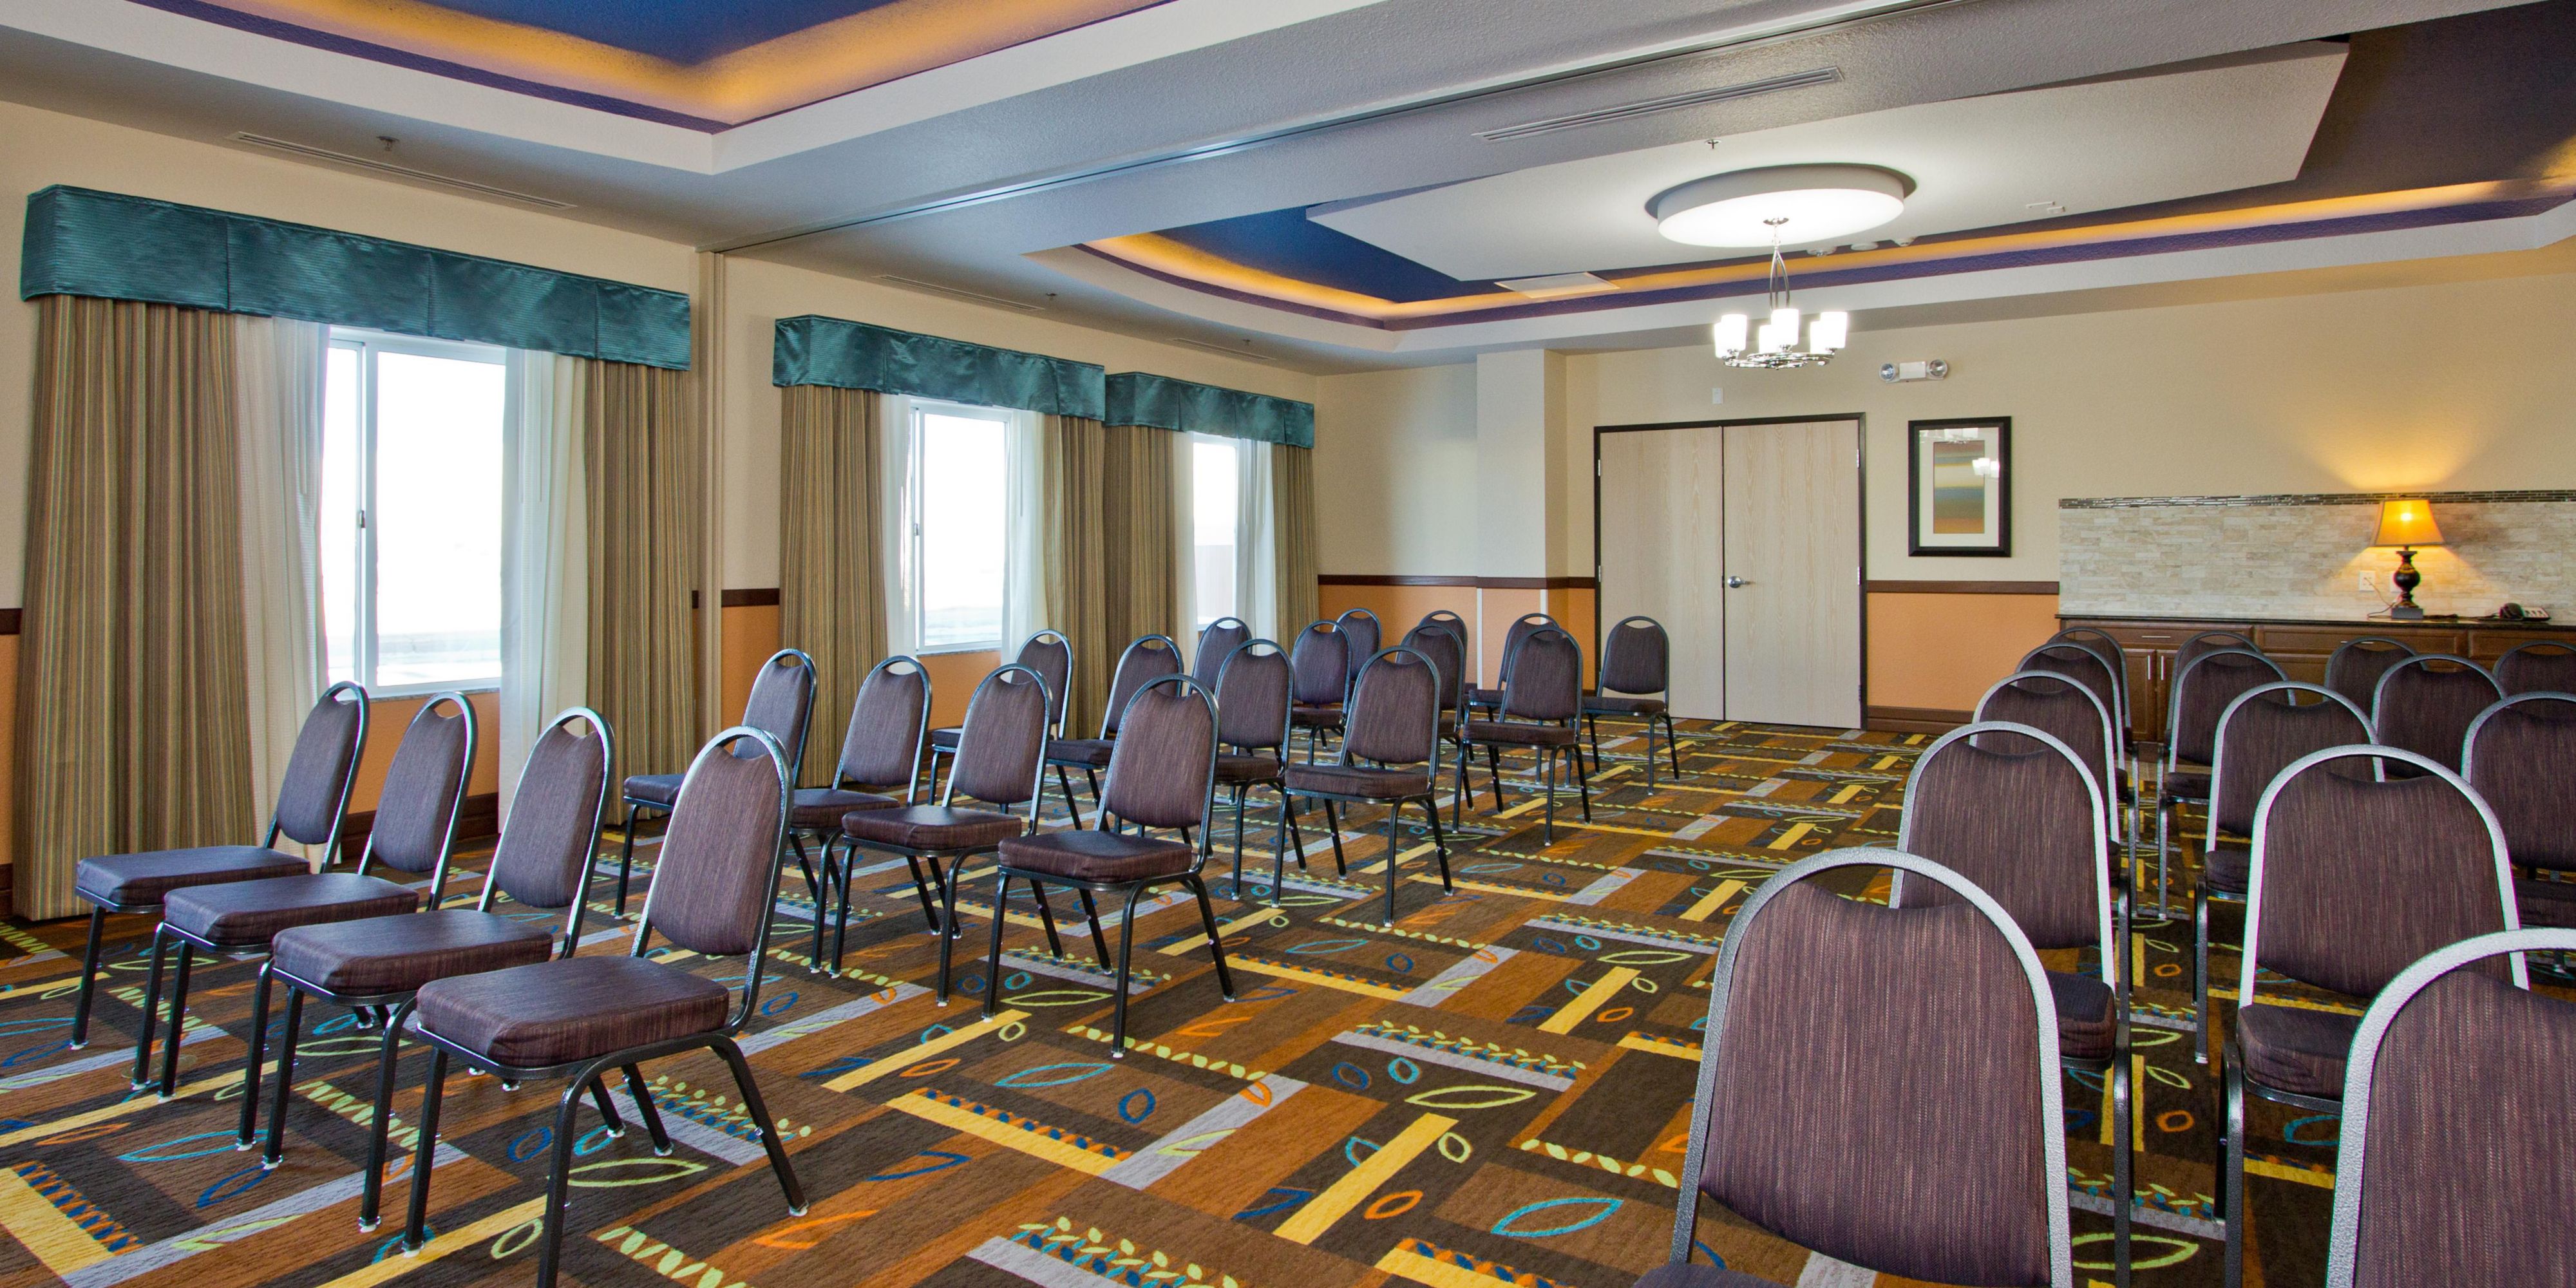 Are you looking to host a family reunion, a baby shower, a 50th wedding anniversary celebration, or maybe just to host a training class of sorts?  We've got you covered with our 1288 square foot meeting room! Depending on your set-up requirements, we have hosted as many as 100 people!.  Contact Caleb Brooks at (303) 371-9498 for more information.